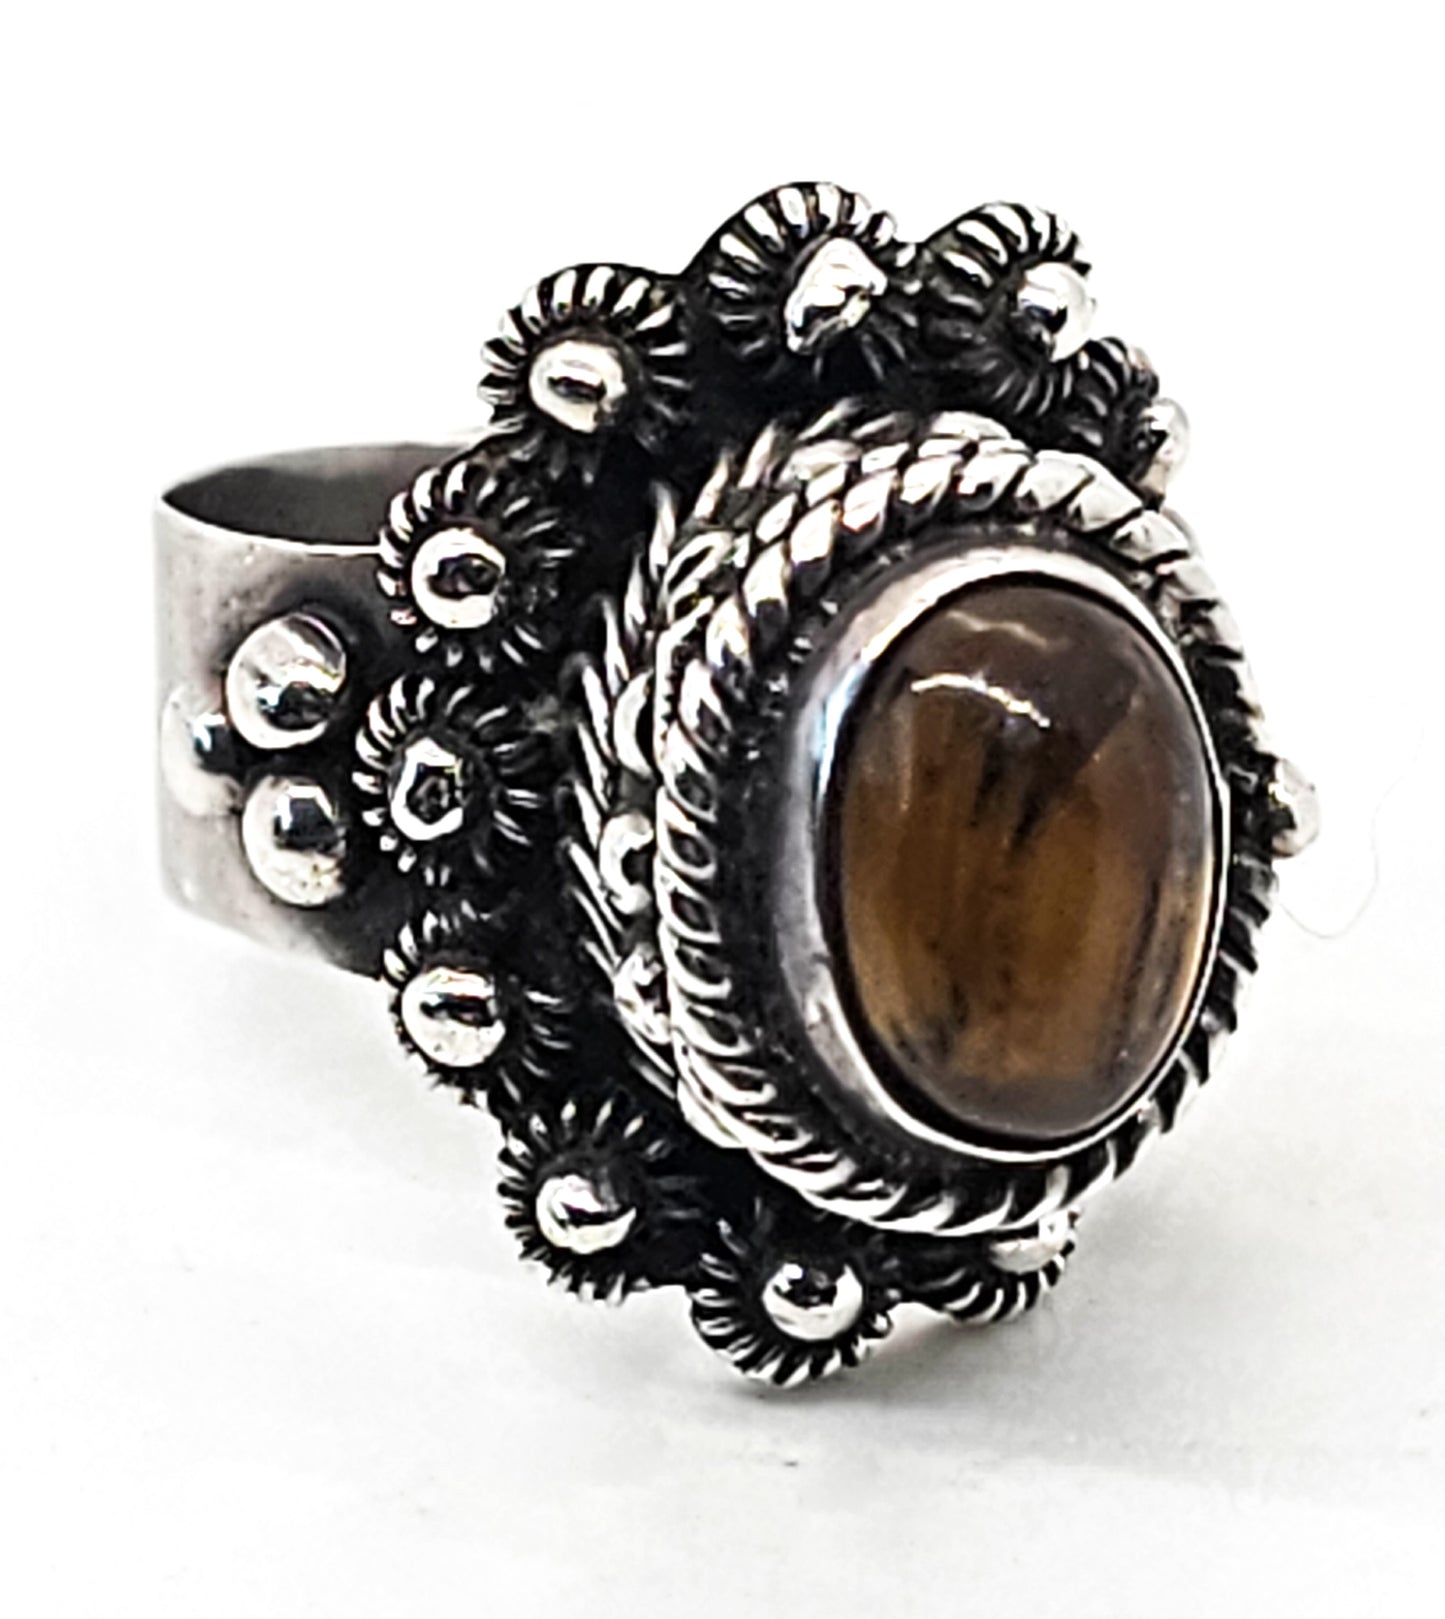 Vintage Poison ring Tiger's Eye Taxco Mexico sterling silver adjustable ring